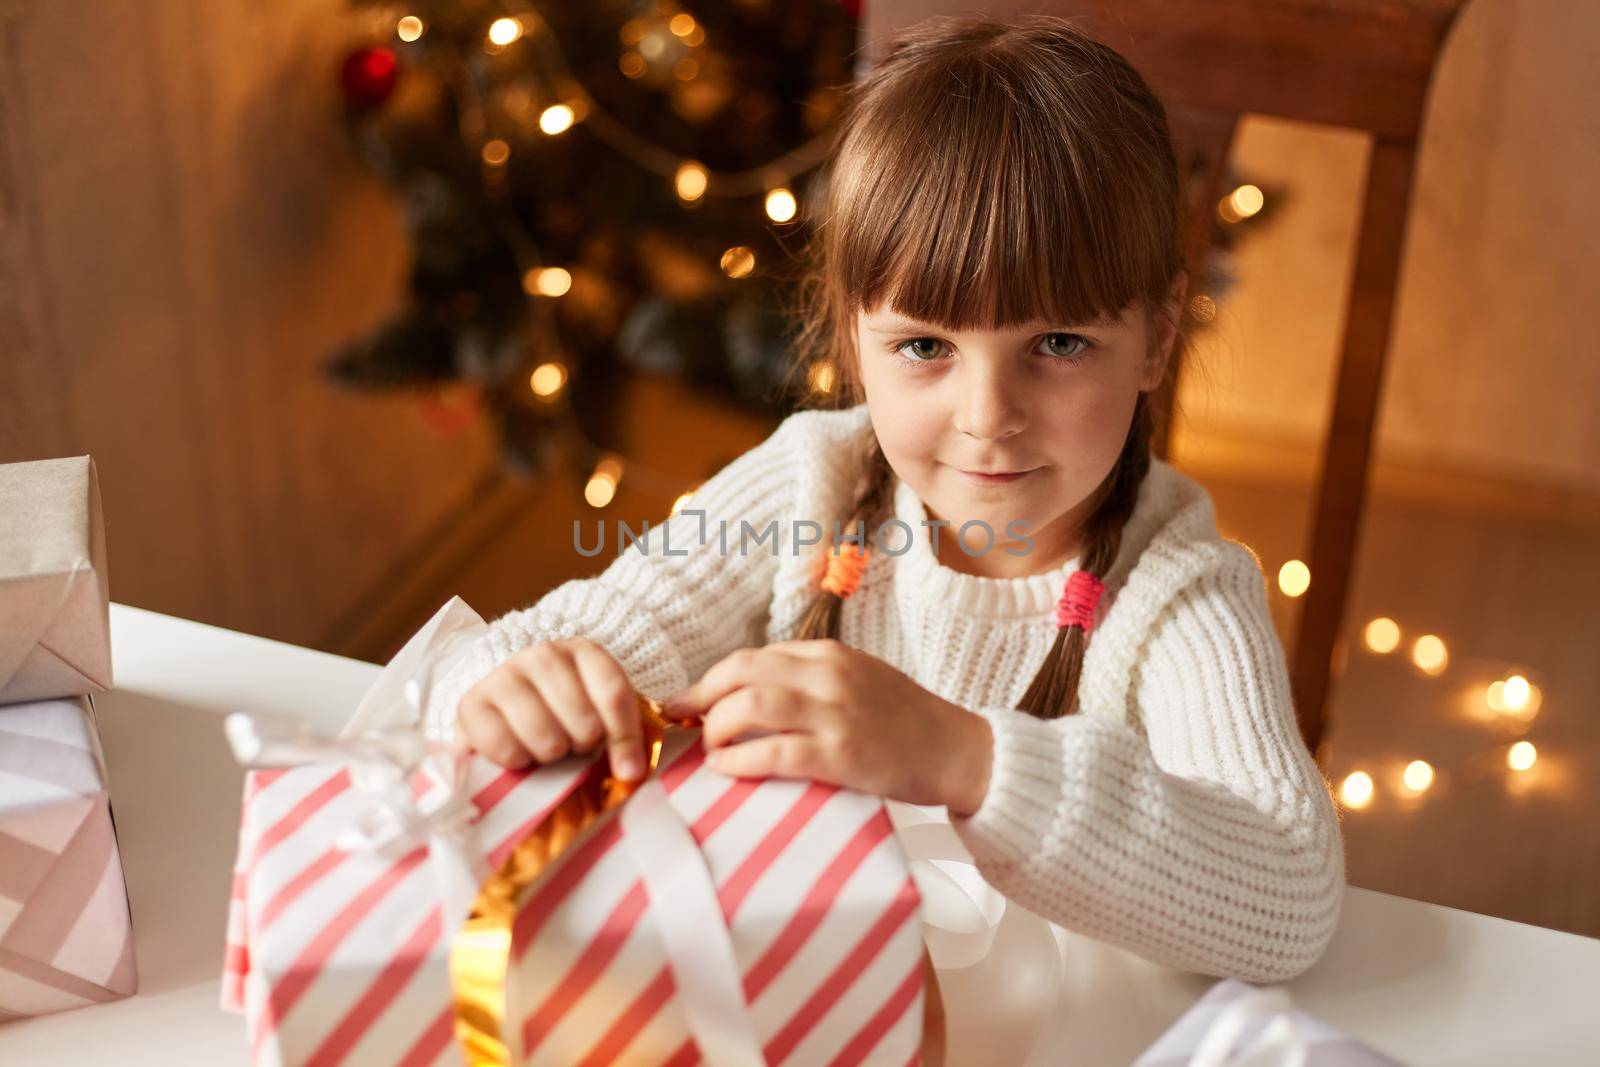 Charming female with braids wearing casual white sweater packing Christmas gifts, looking at camera with cute expression, sitting at table and preparing for new year. by sementsovalesia